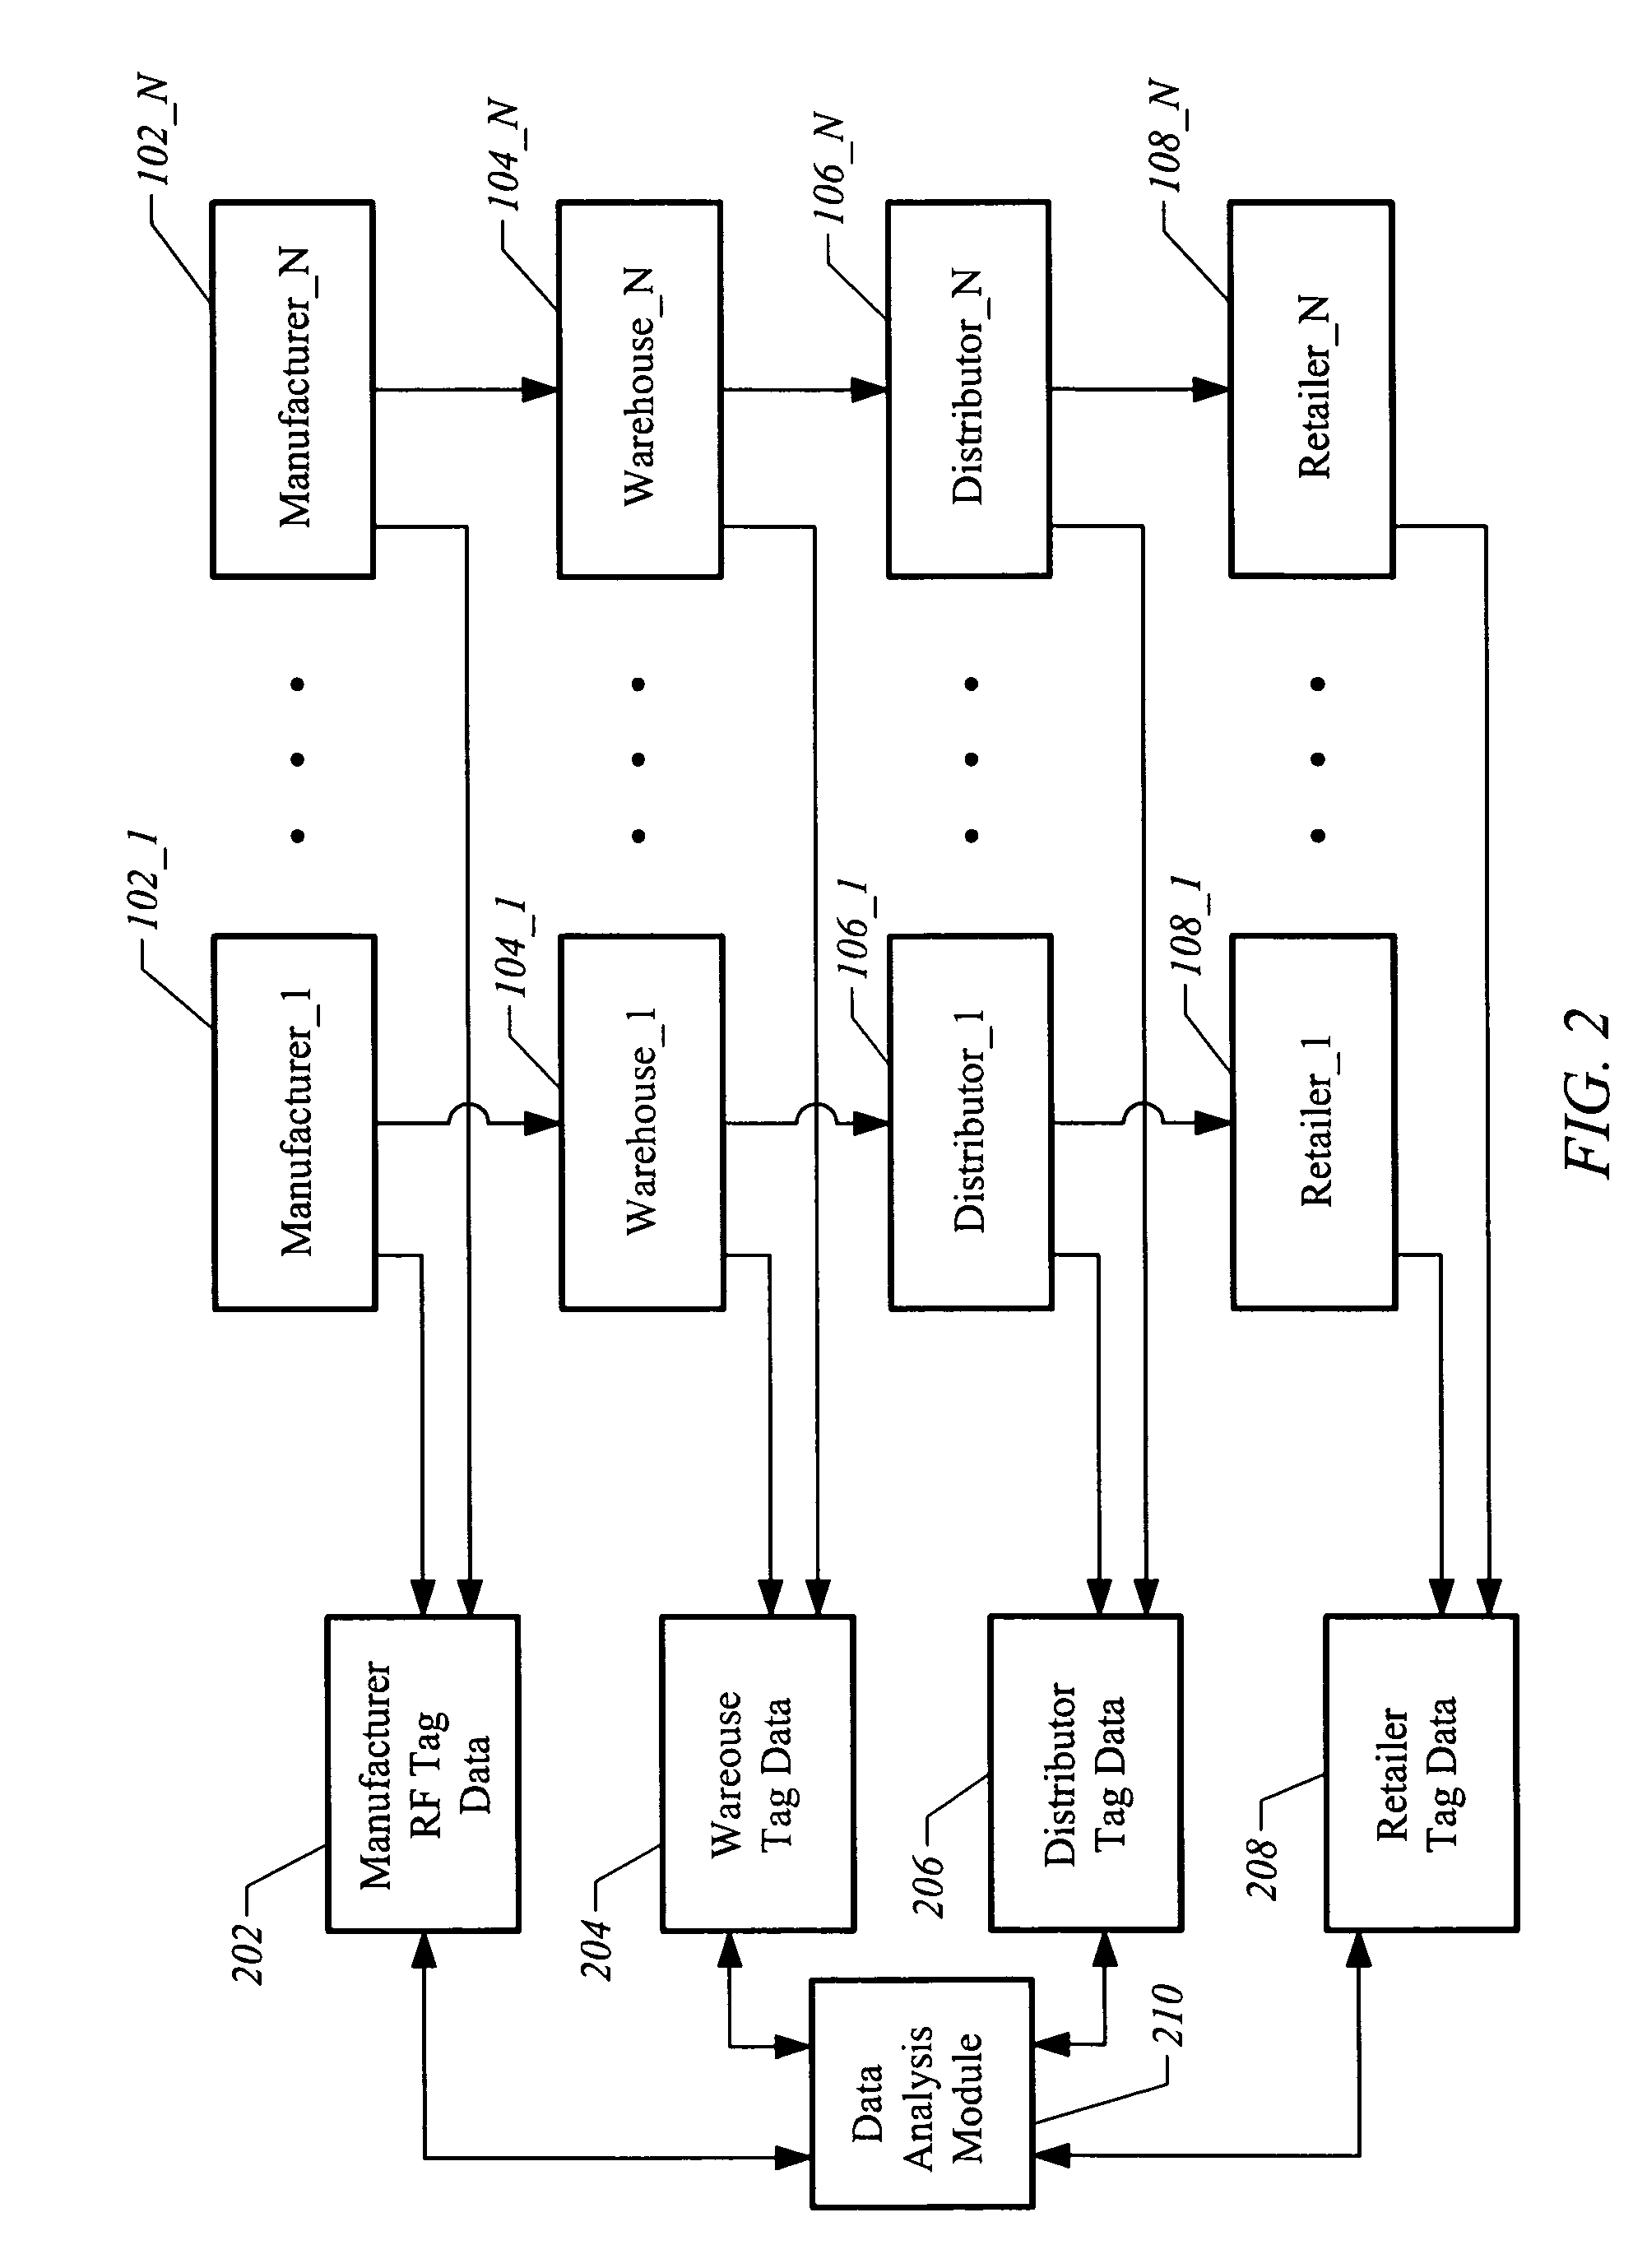 Apparatus and method for authenticating products